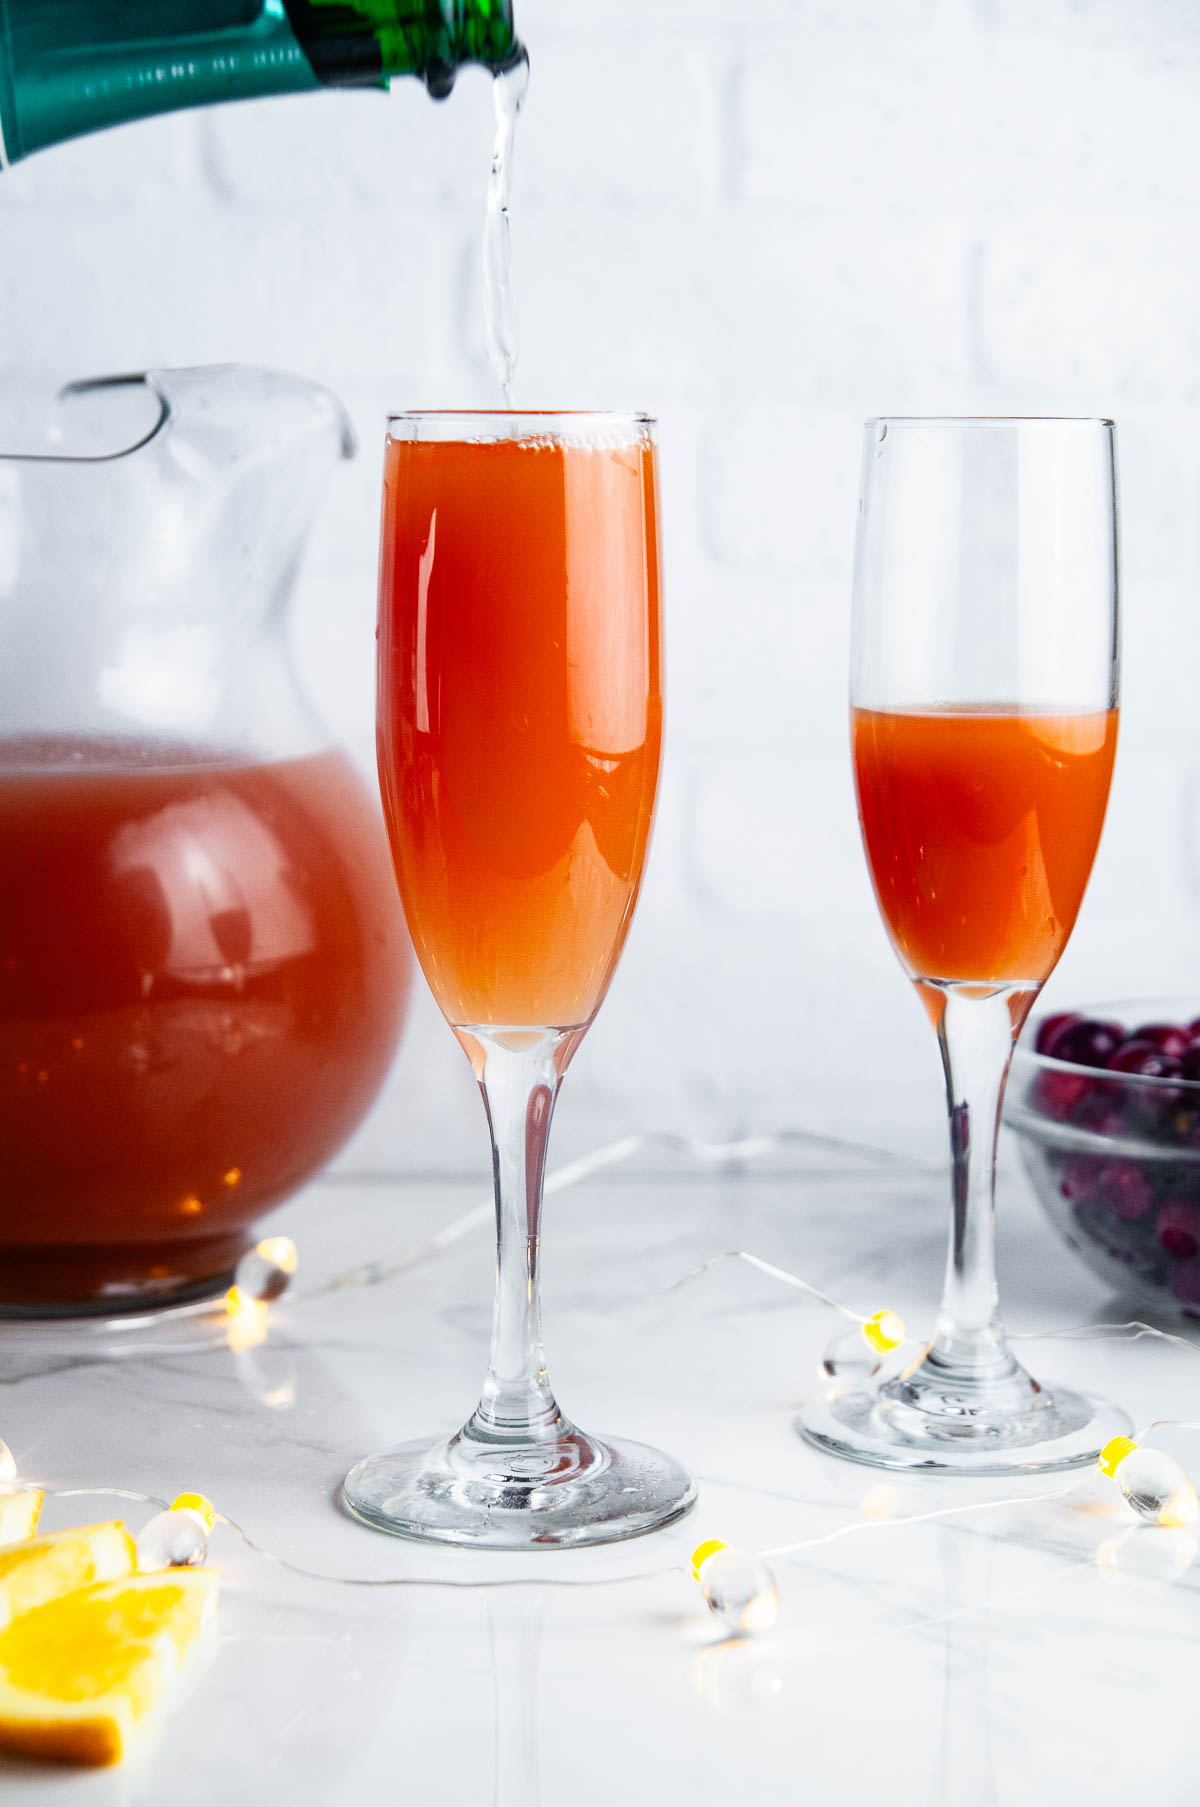 Top off your Christmas mimosas with champagne, Prosecco, or another sparkling white wine.